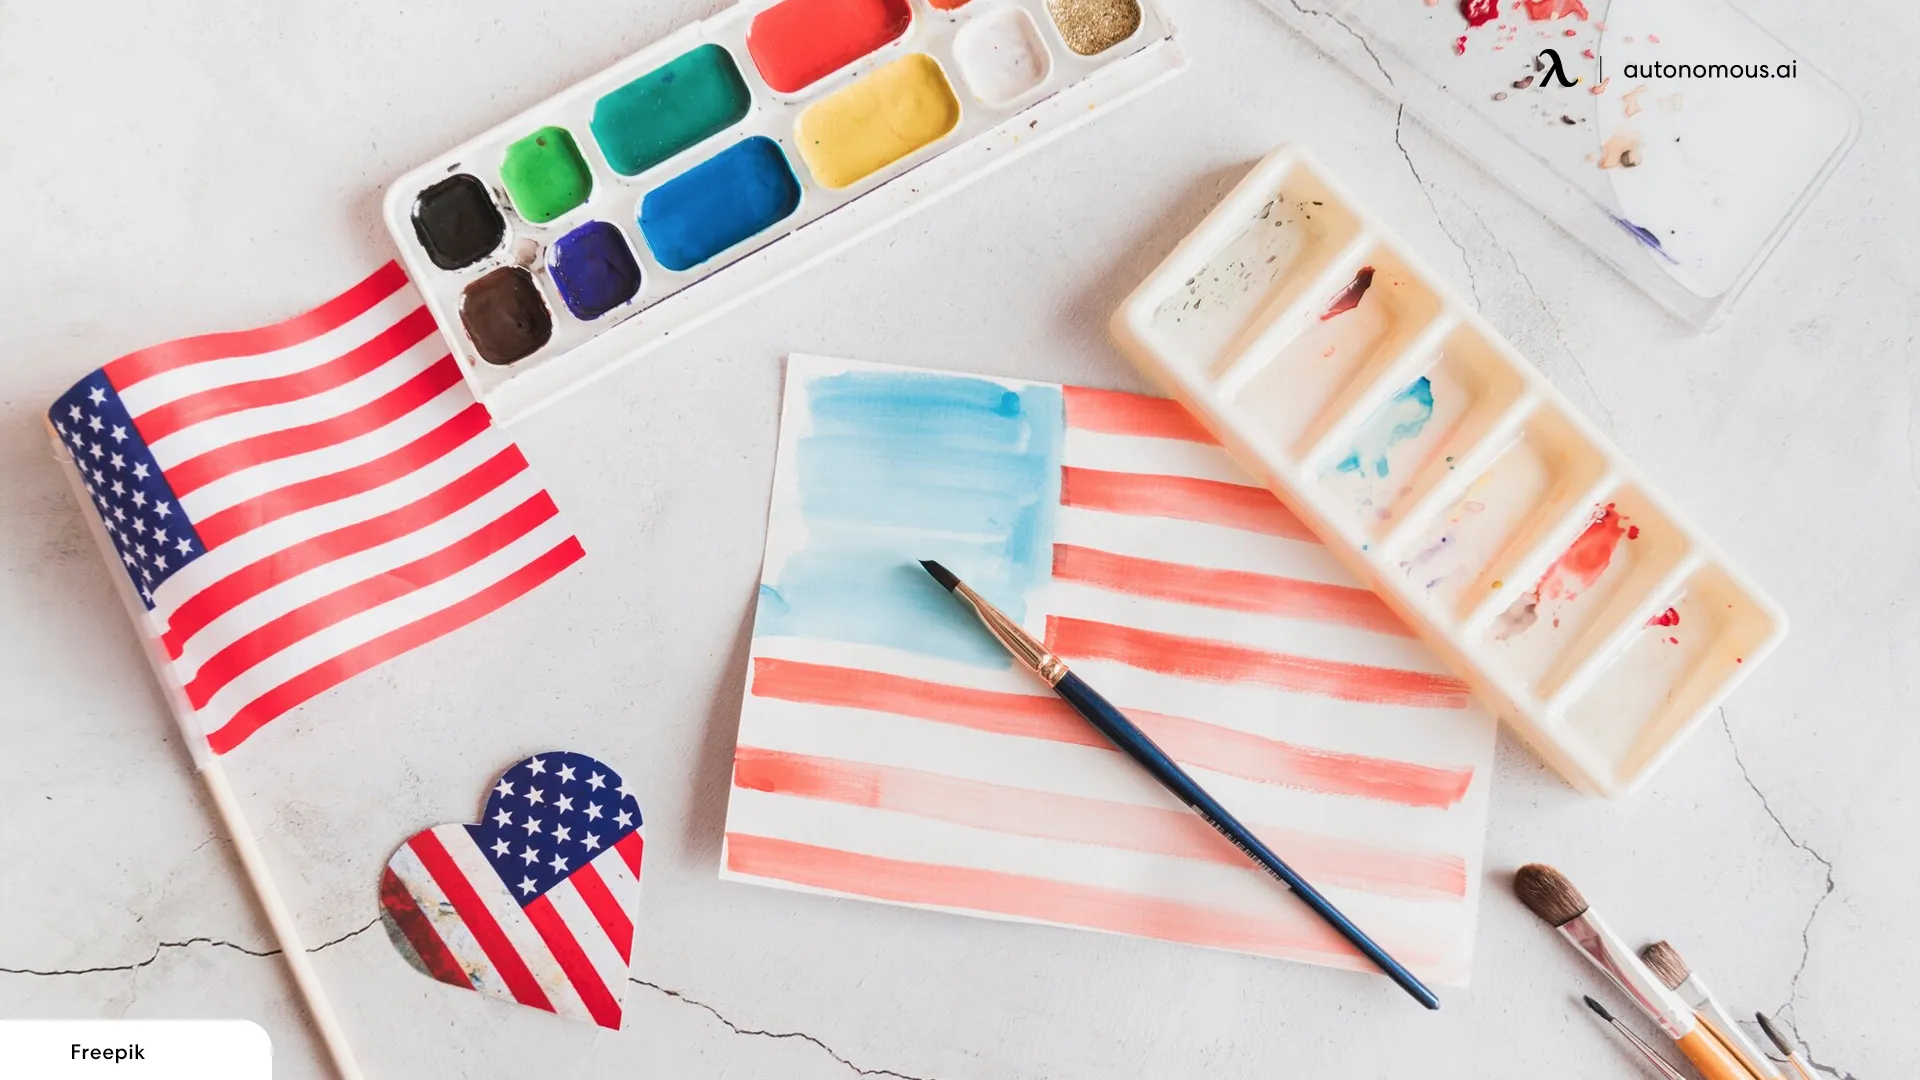 What Is the Patriotic Color Palette and Theme on Labor Day?